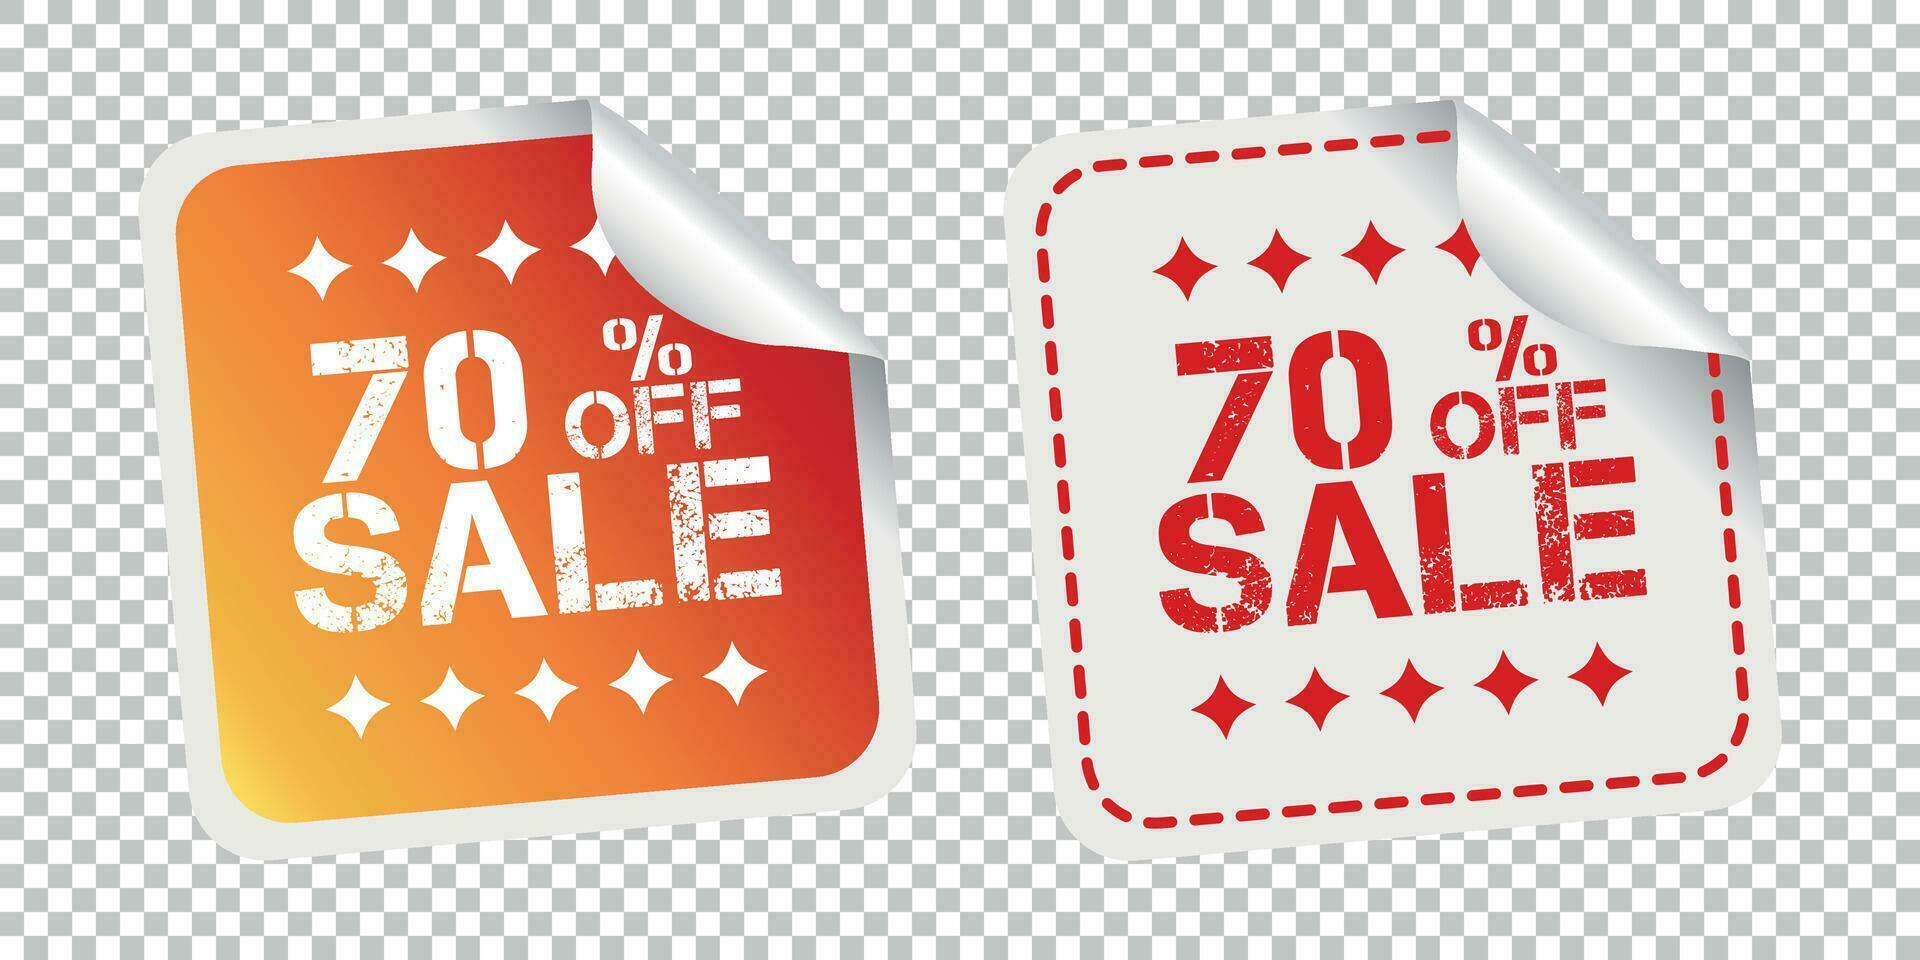 Sale stickers 70 percent off. Vector illustration on isolated background.